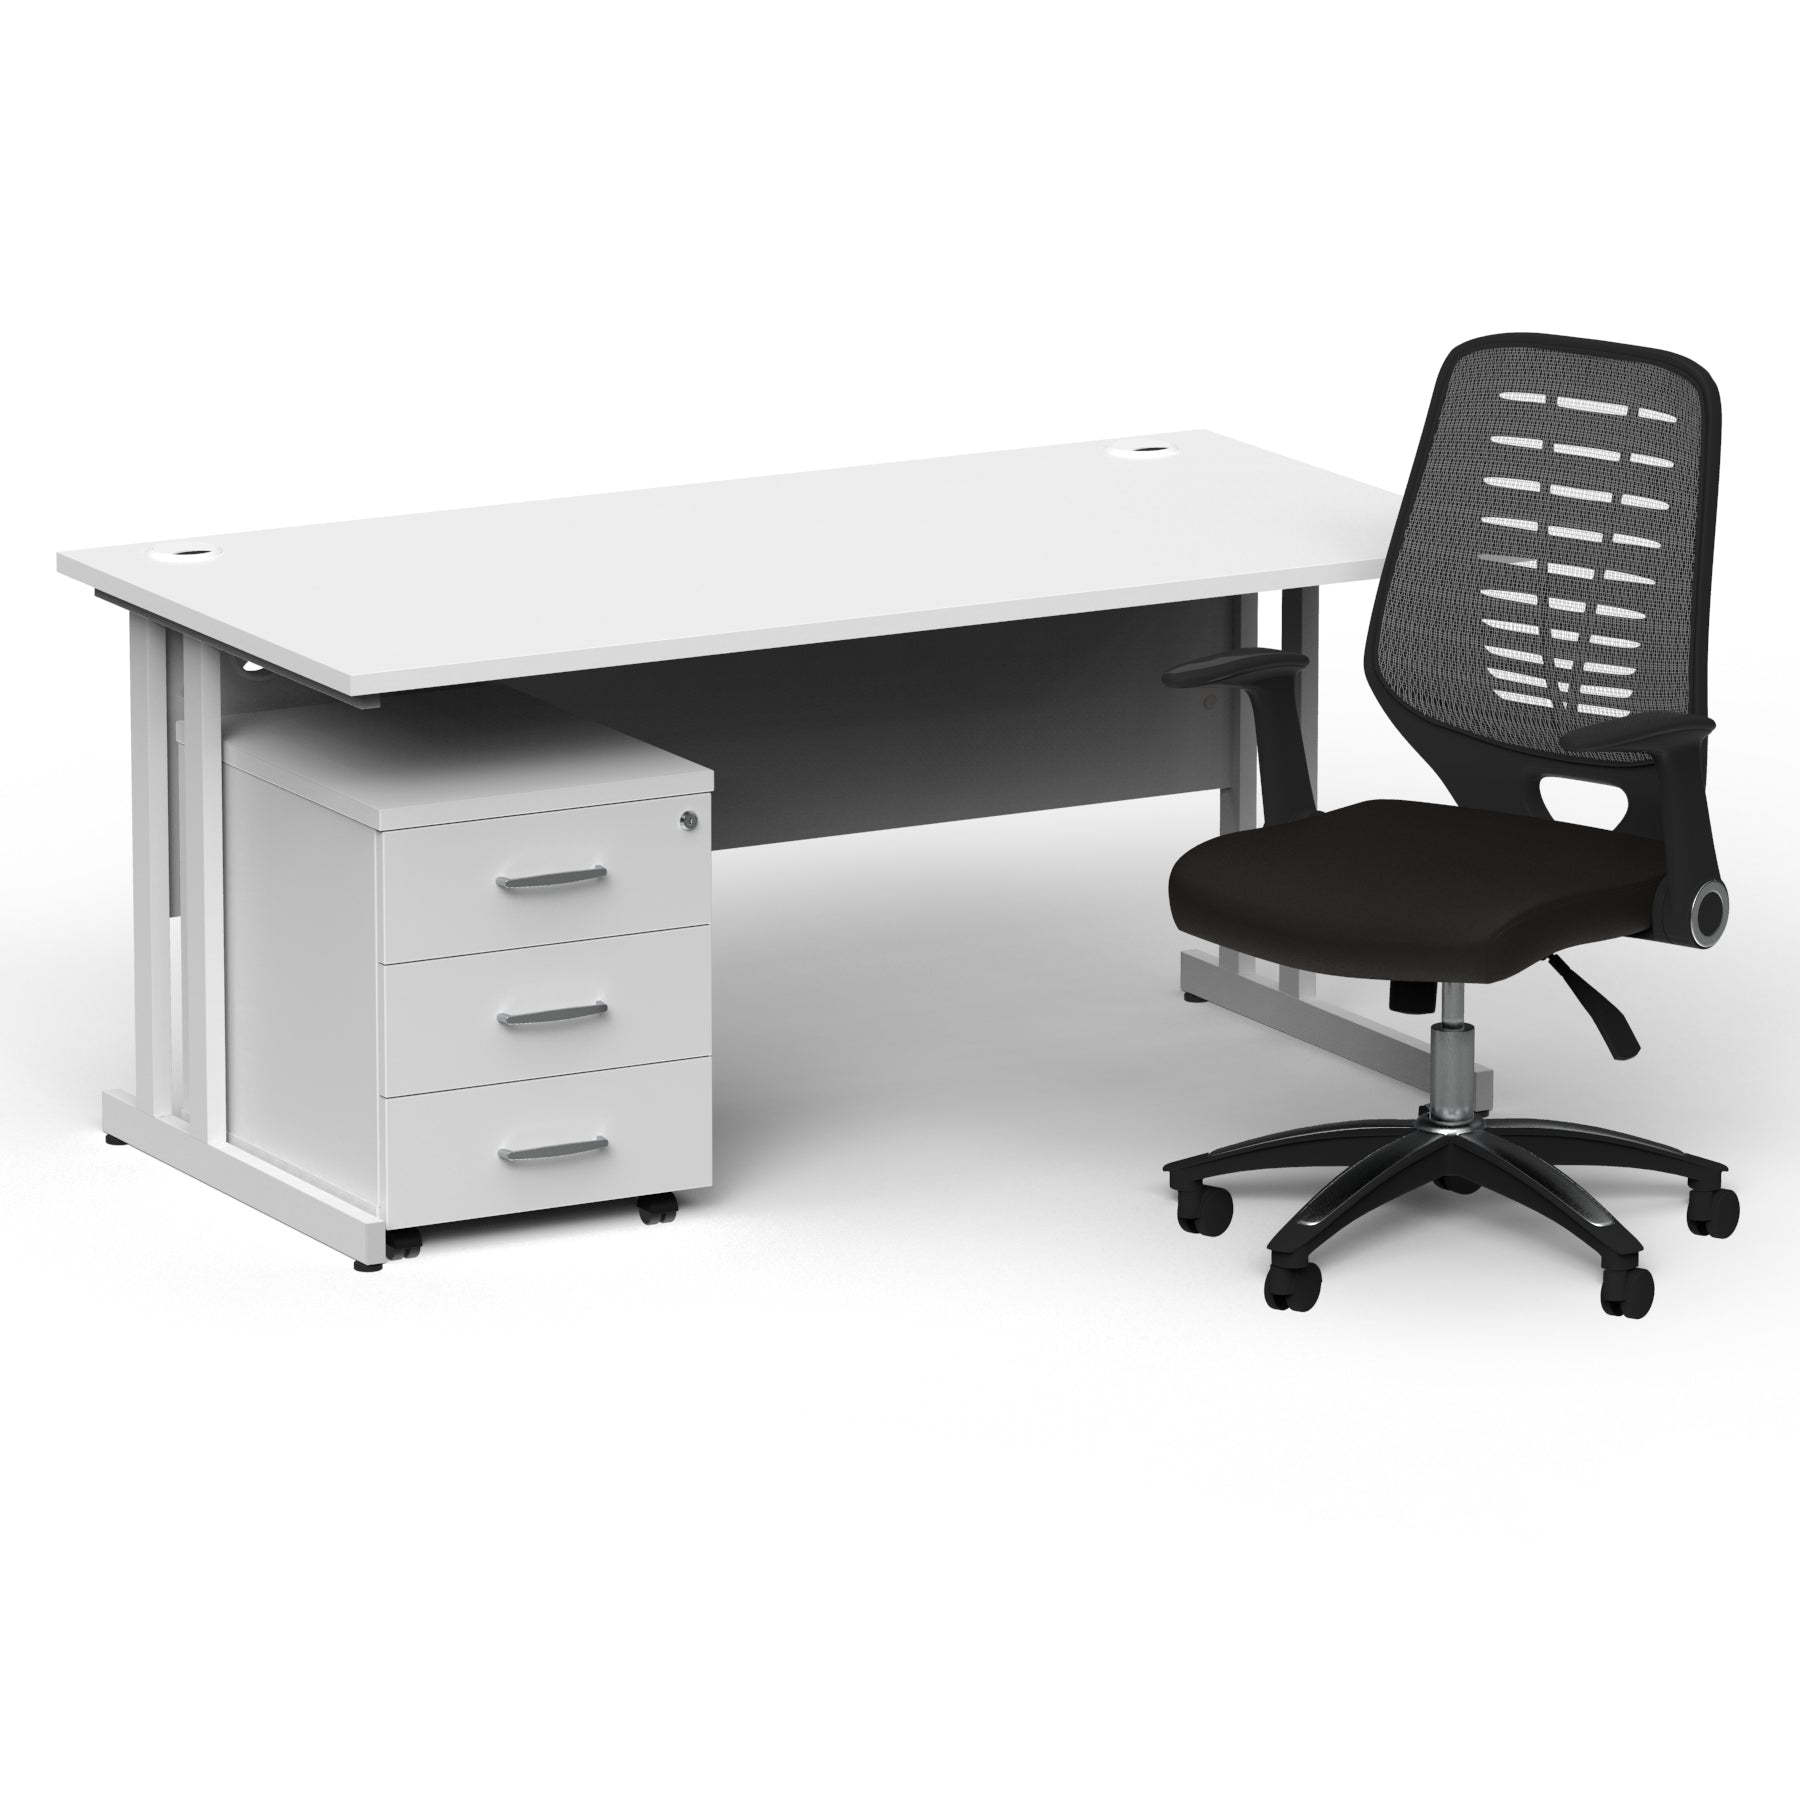 Impulse 1600mm Cantilever Straight Desk & Mobile Pedestal with Relay Silver Back Operator Chair - 5-Year Furniture Guarantee, MFC Material